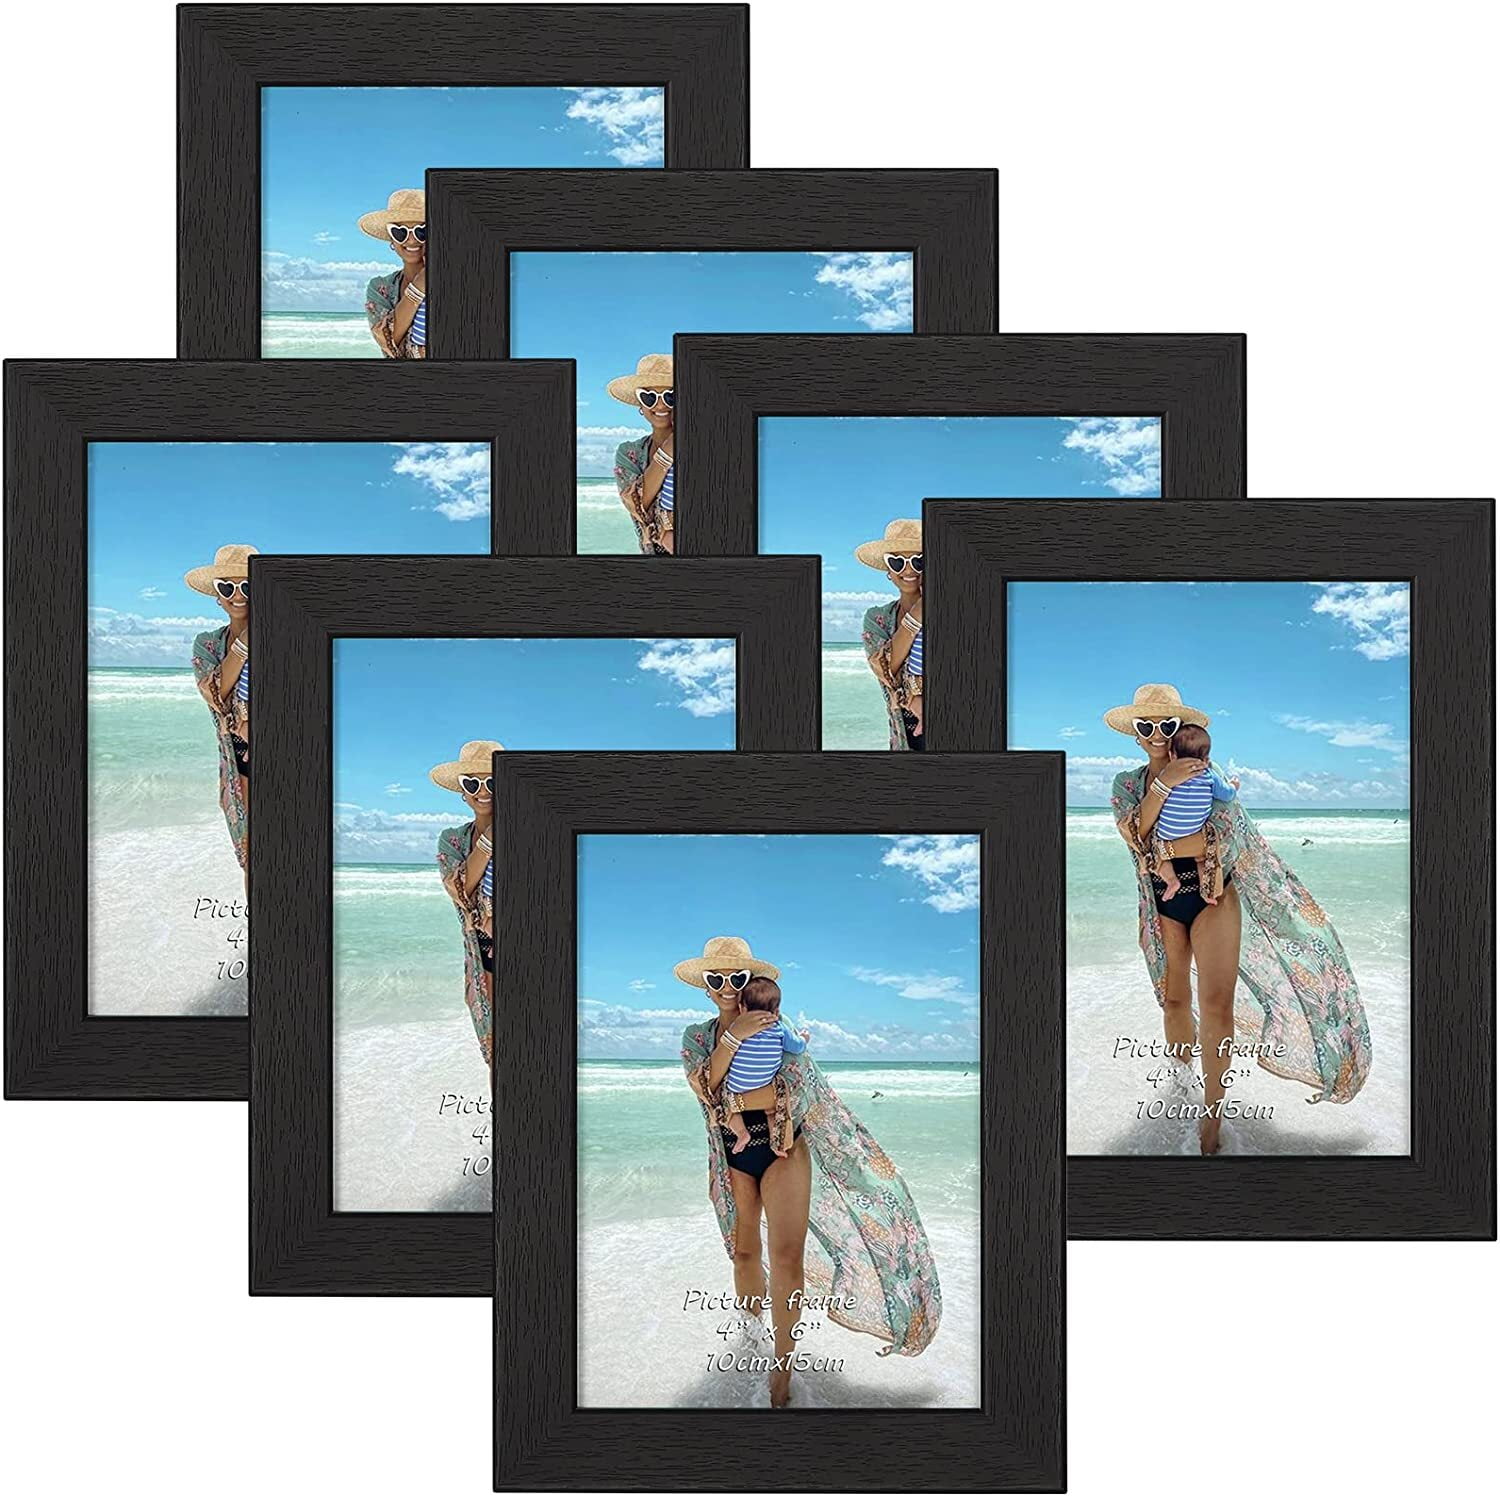 Mainstays 11x14 Matted to 8x10 Front Loading Tabletop Picture Frame, Black